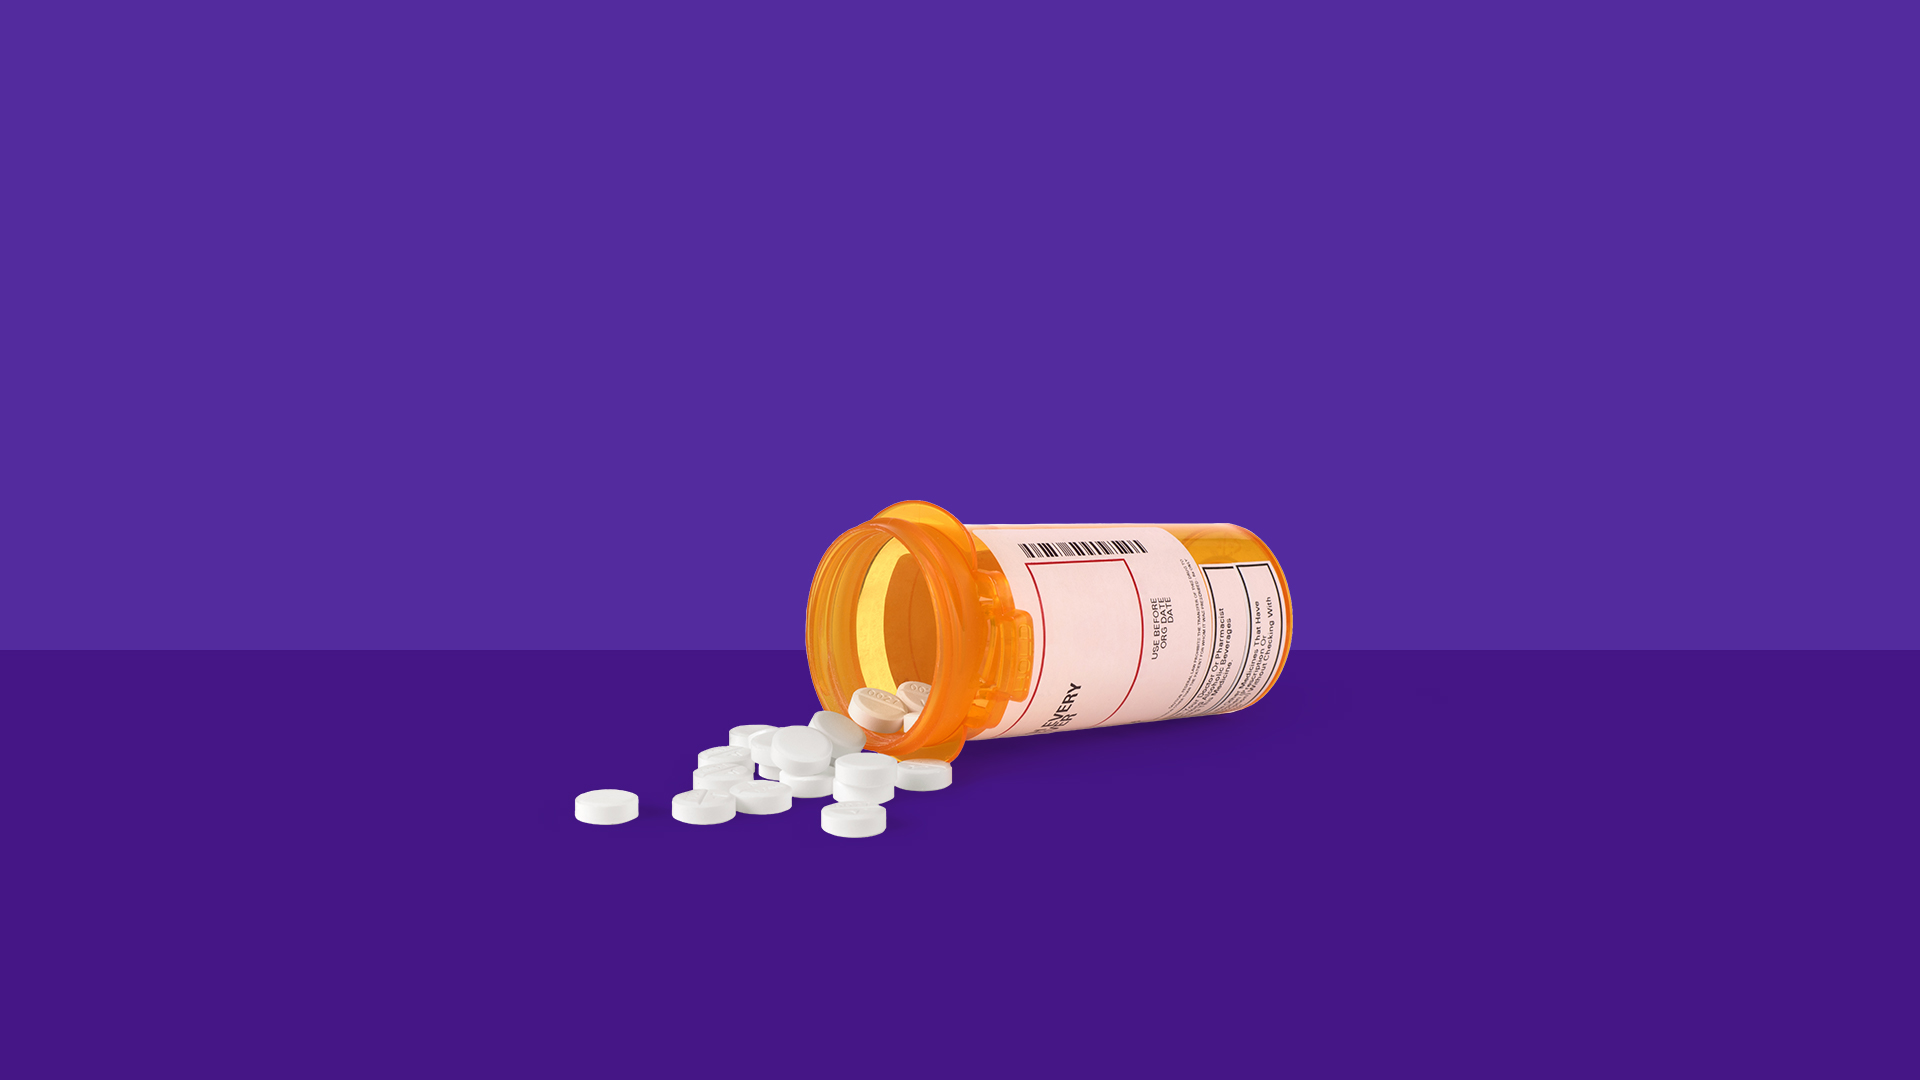 Spilled prescription bottle of pills: Compare common vs. serious Nexium side effects